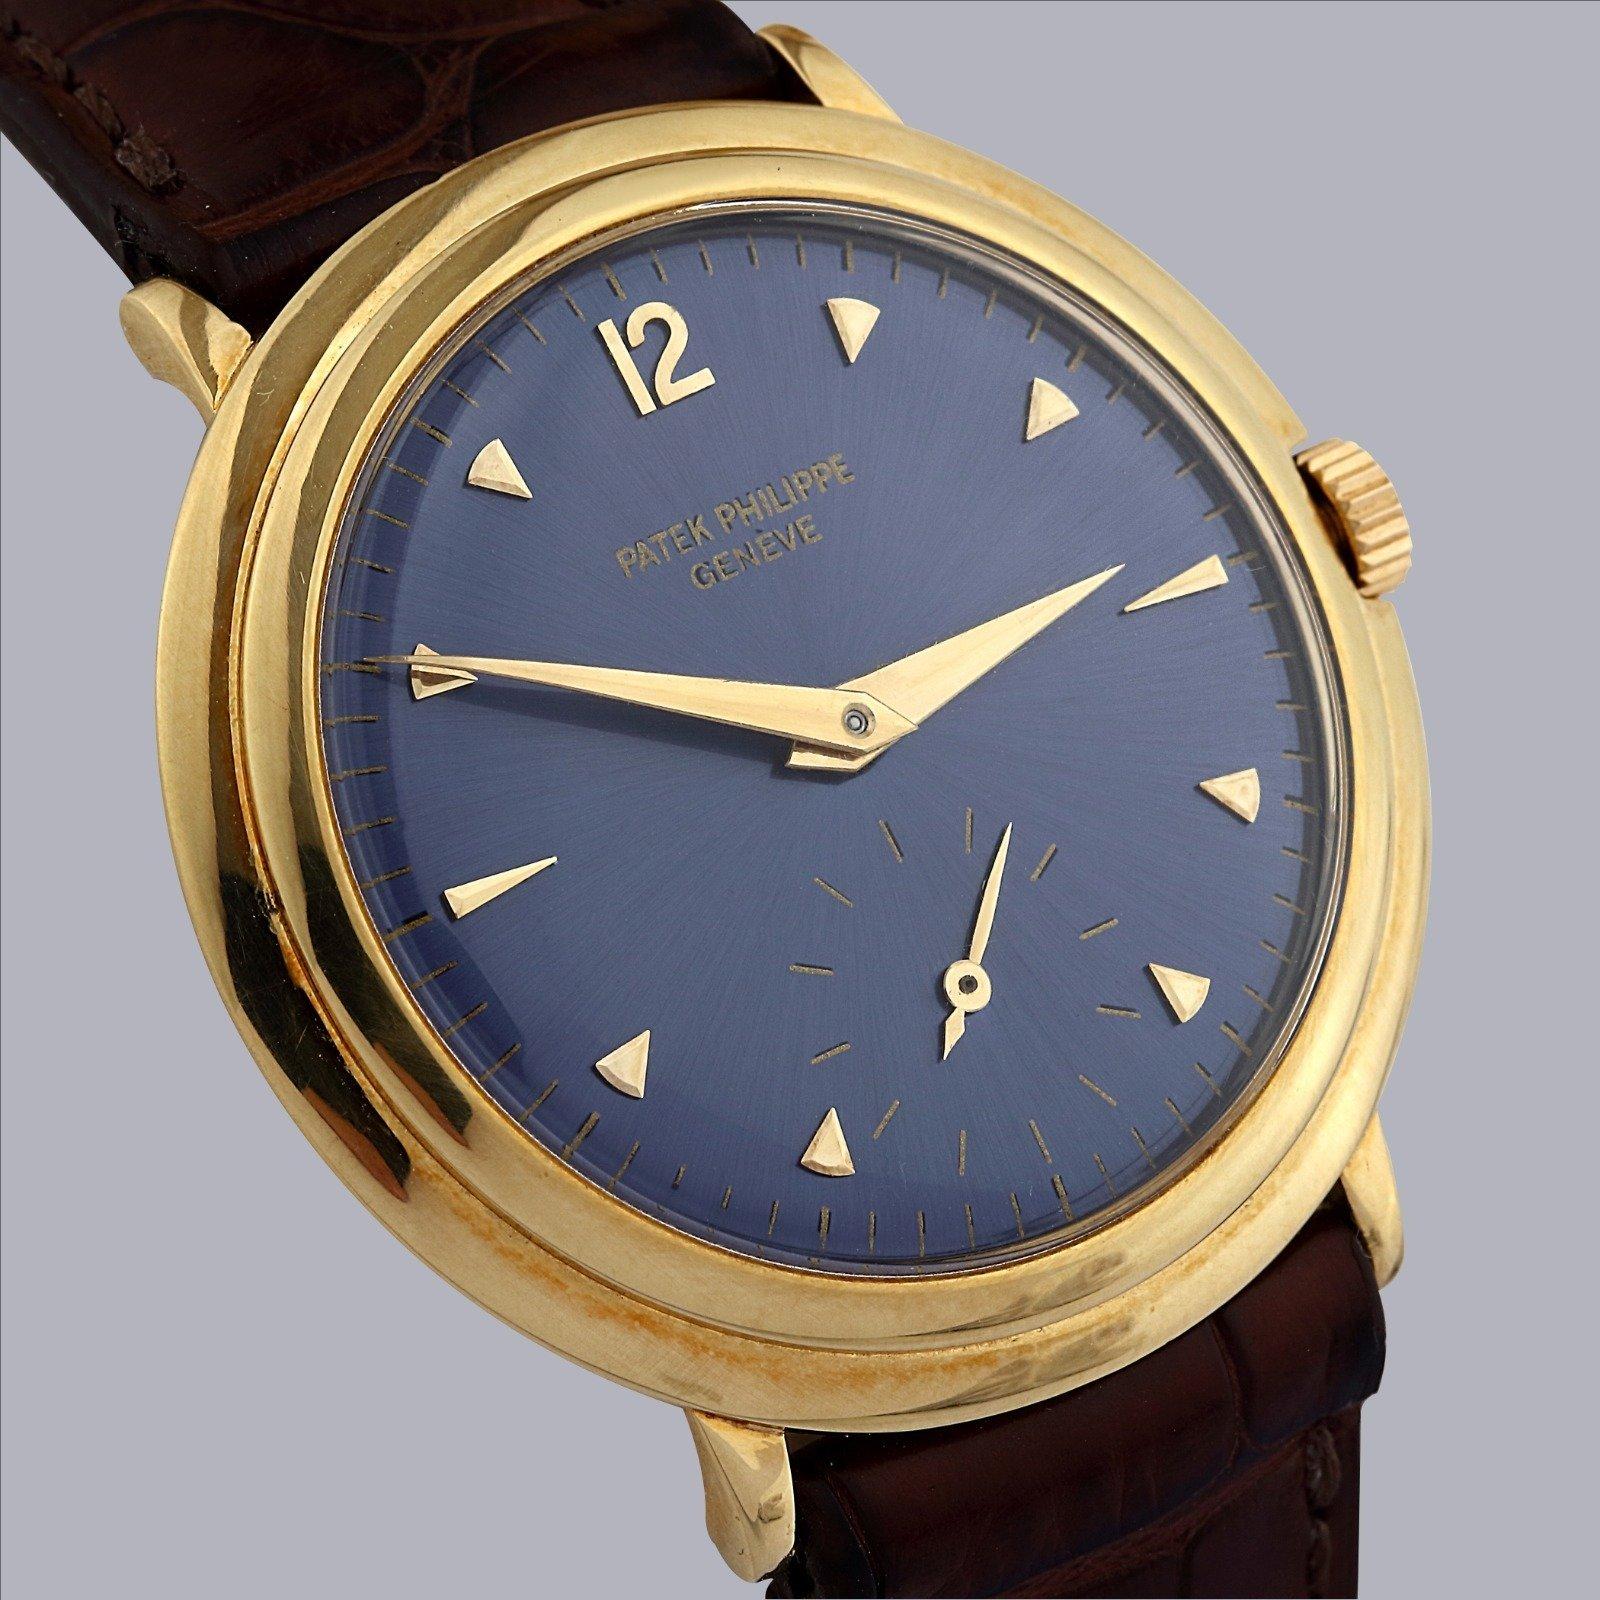 Brand: Patek Philippe (Guaranteed Authentic)
Reference Number: 2515
Manucfacturing Year: 1954
Gender: Men's
Metal: 18 K Yellow Gold 
Dial: Original Blue Enamel Dial 
Case Size: 36 mm excluding winding crown
Wrist Size: This watch will currently fit